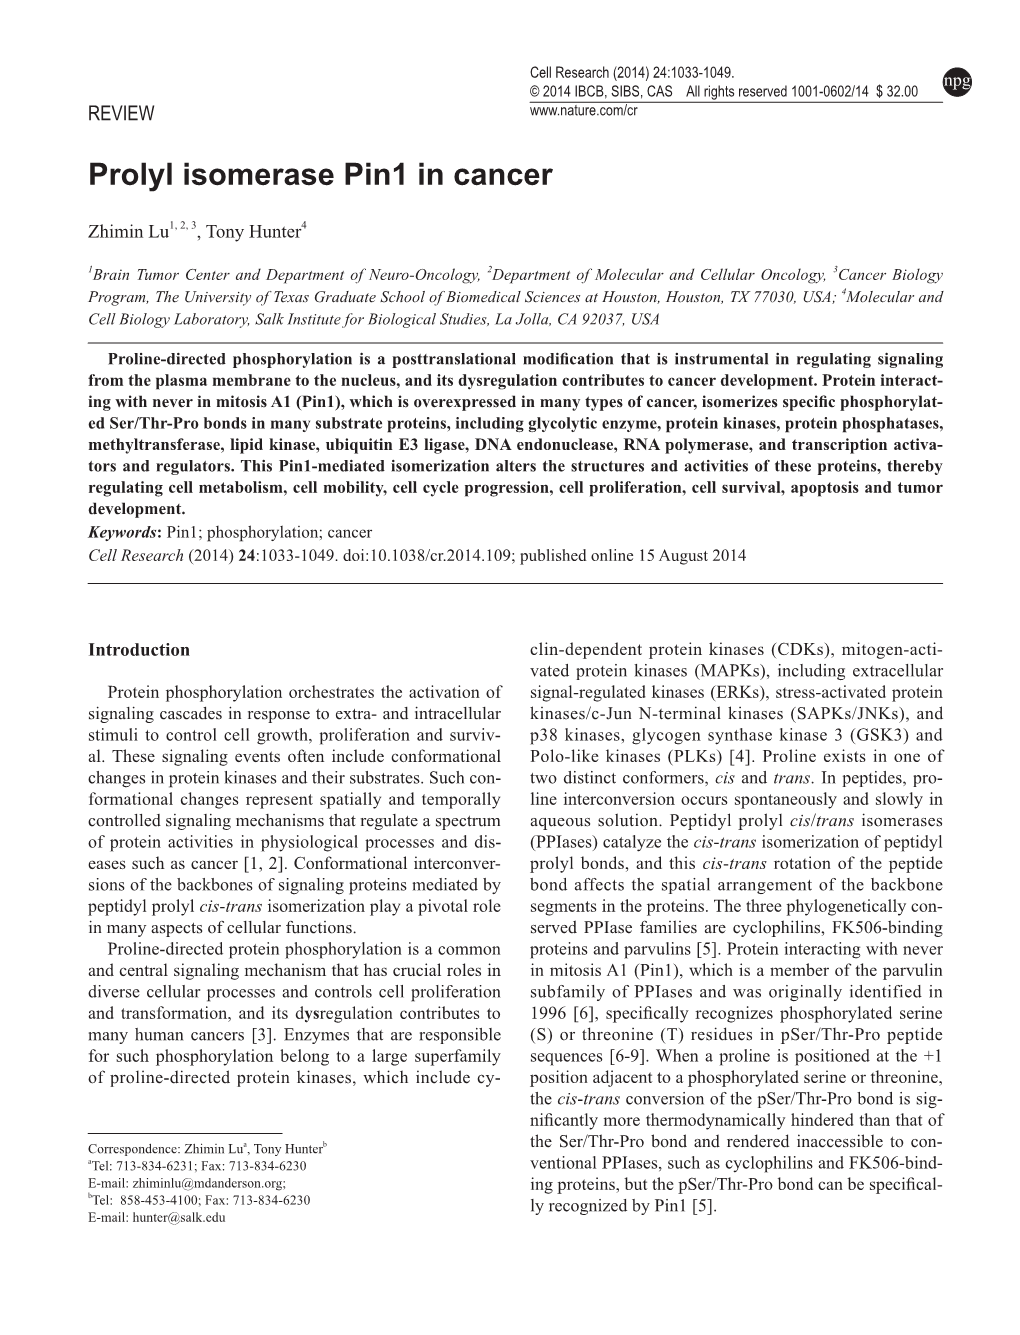 Prolyl Isomerase Pin1 in Cancer